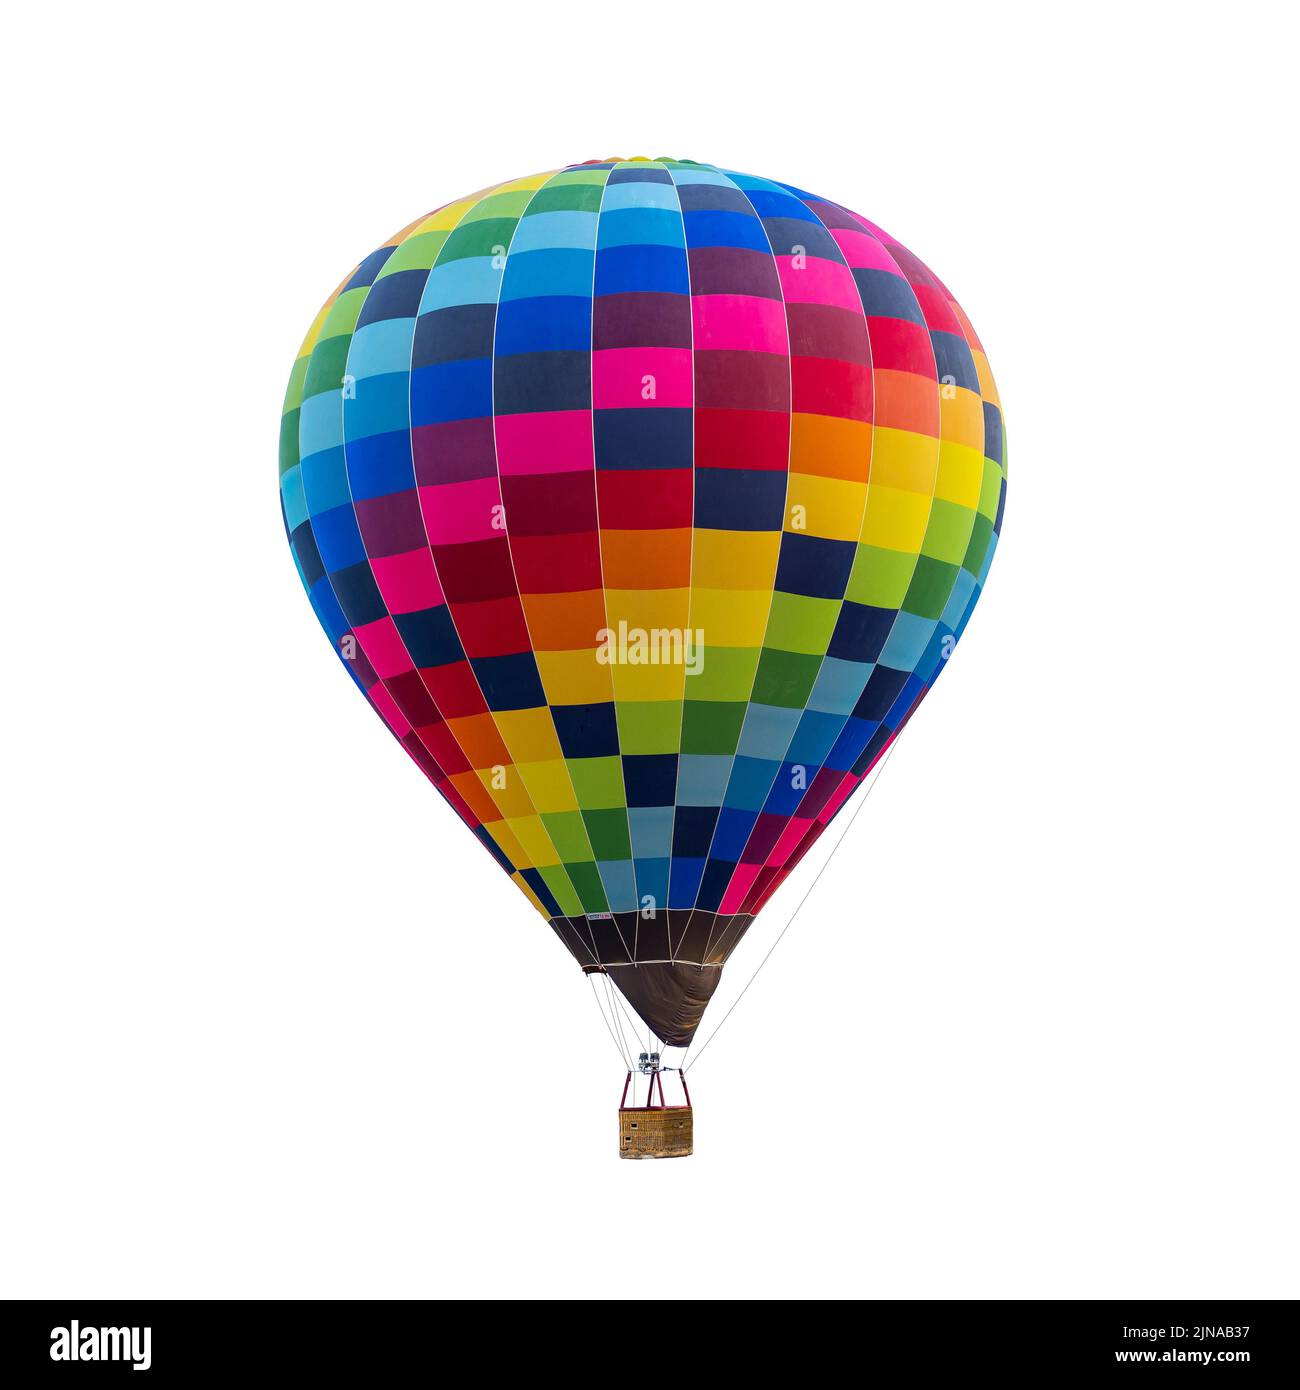 hot air balloon with different colors isolated on white background. Stock Photo